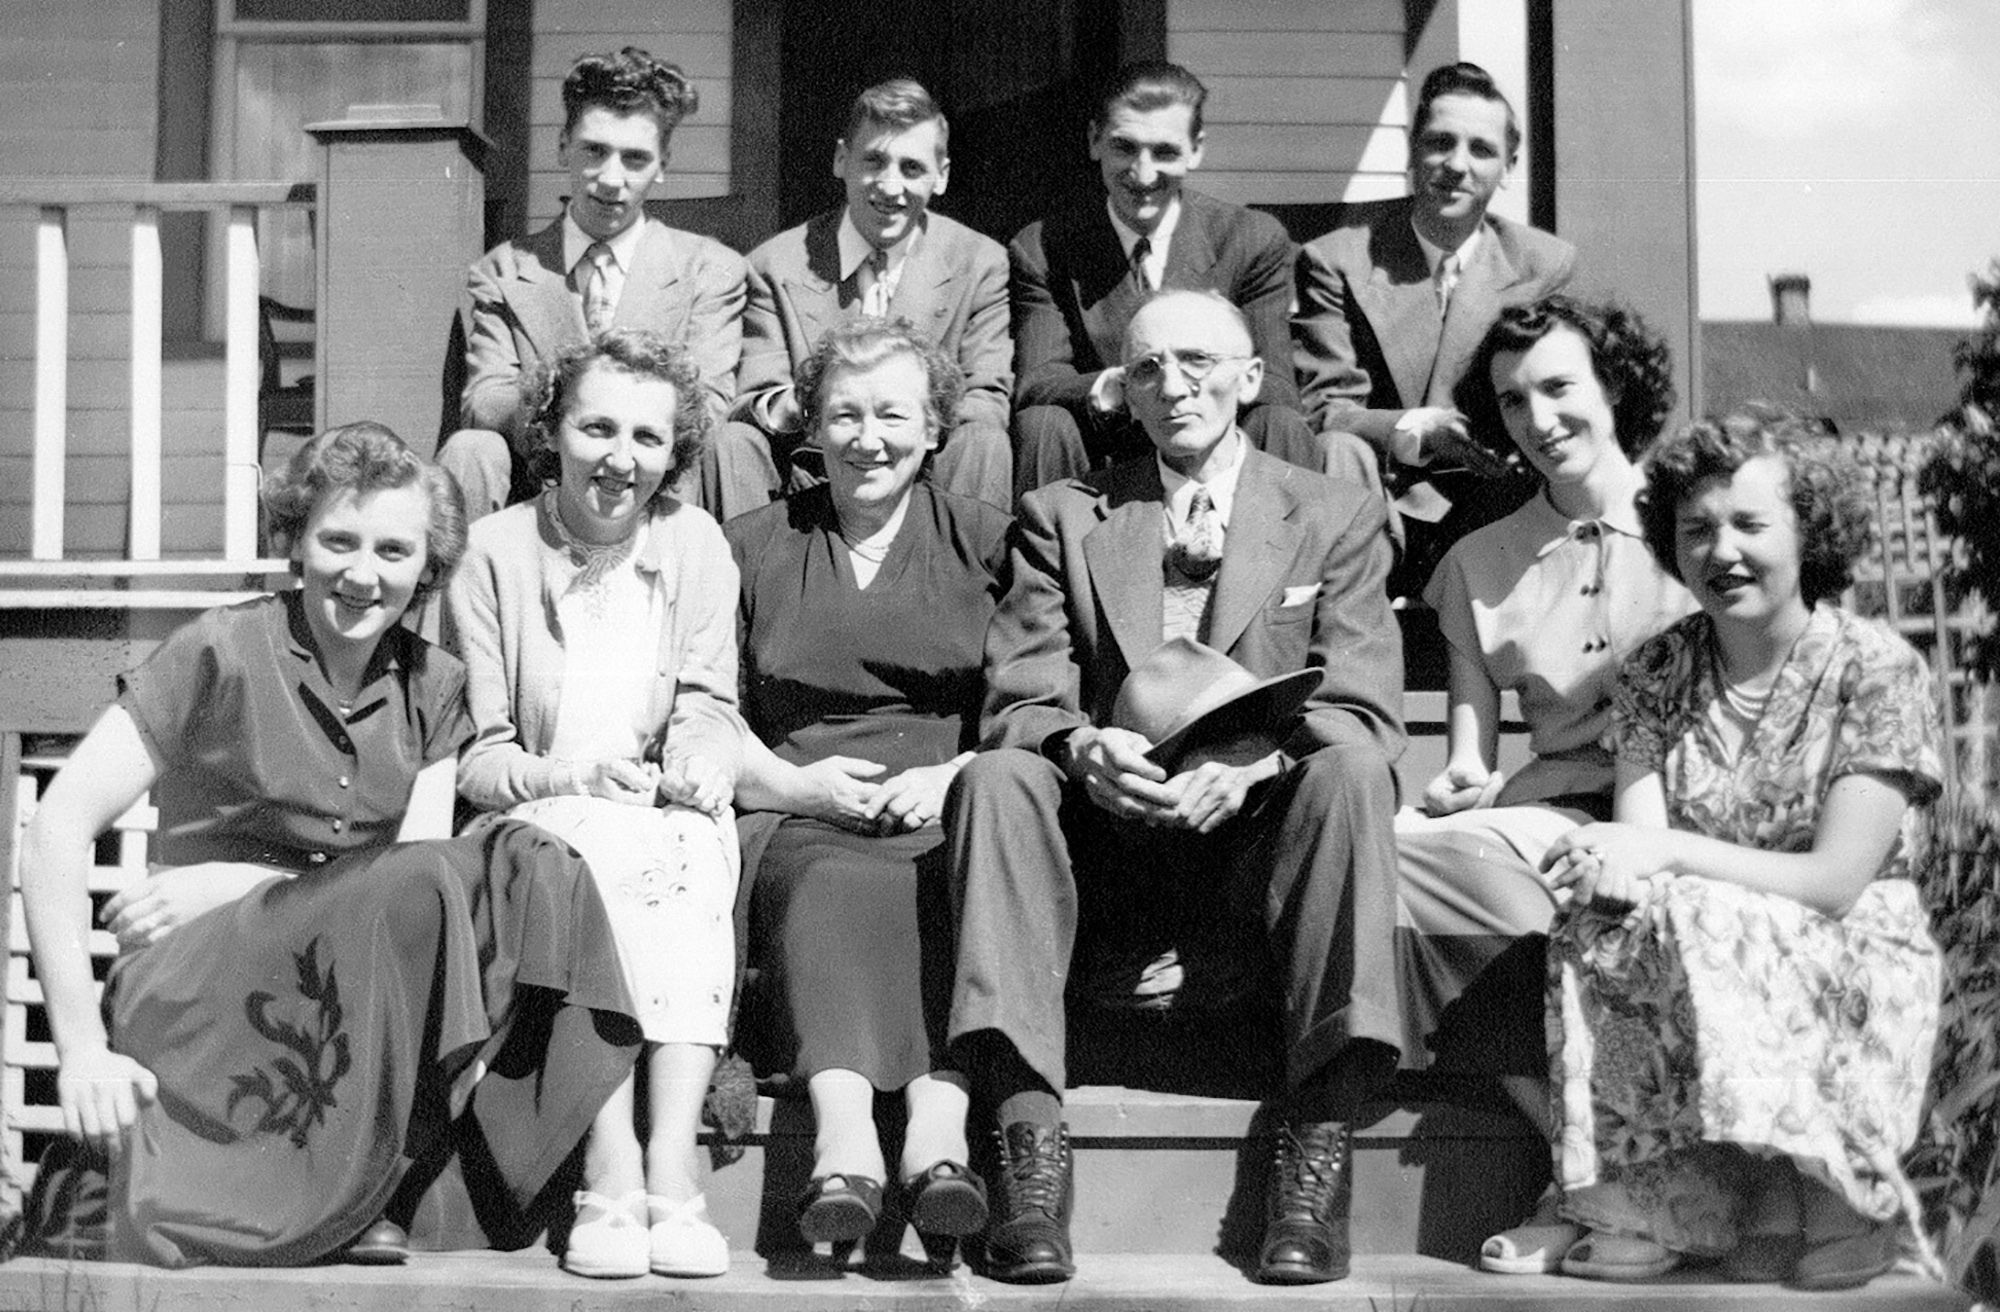  The Askew Family in 1951. Back L to R: Don, Gordon, David and Lloyd. Front L to R: Winnifred, Margery, parents Mary and R.B. (Dick), Marion and Doreen 